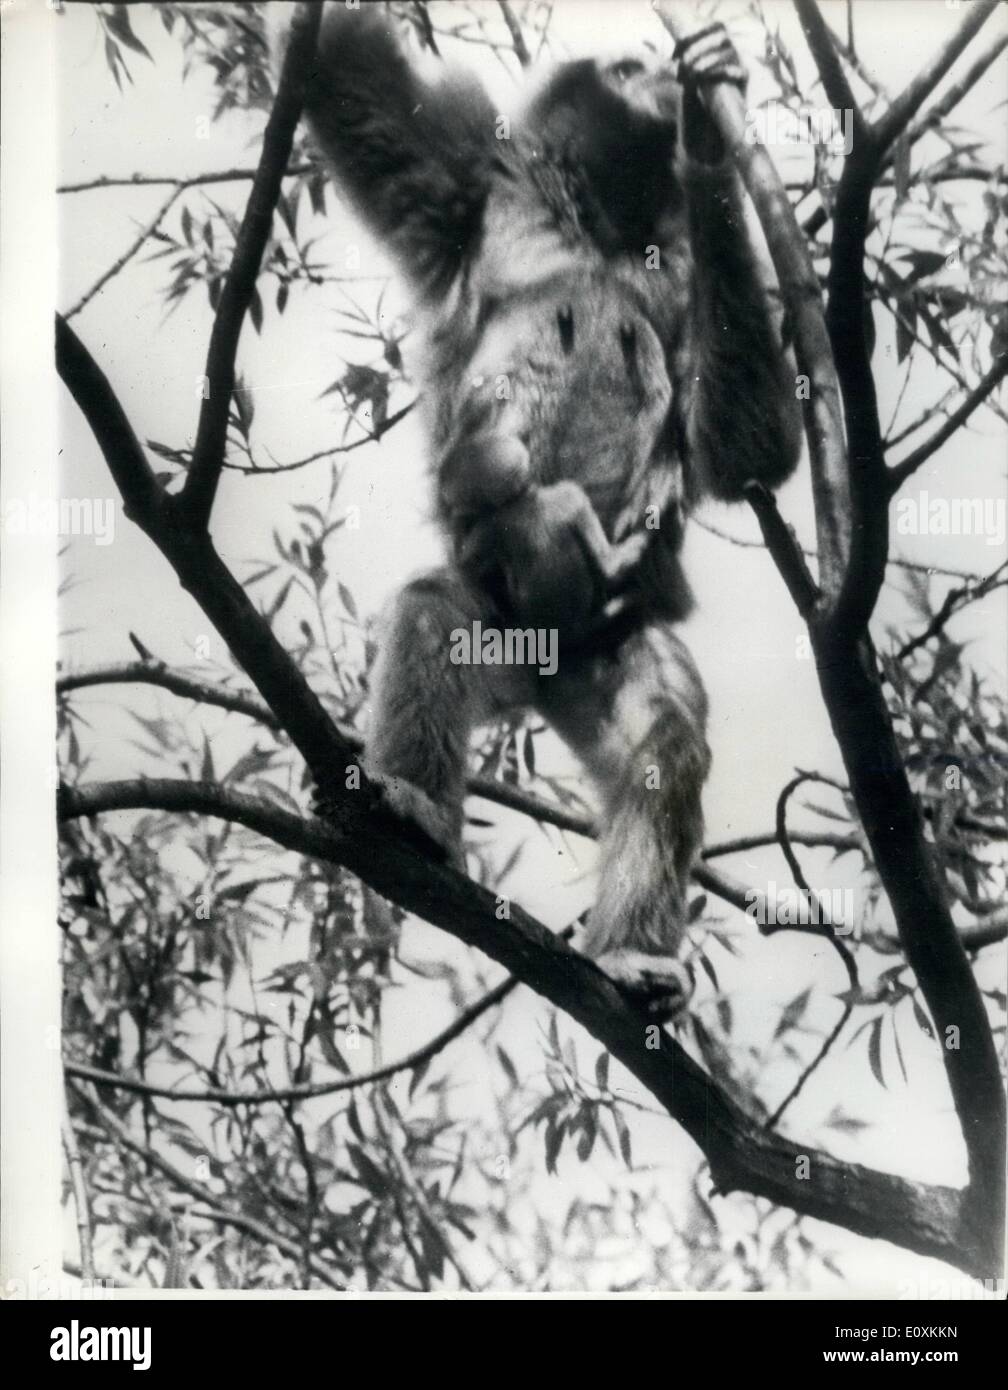 May 05, 1967 - First Baby Gibbon Ape Ever To Be Born In Natural Surrounding In Britain.: The first baby Gibbon Ape ever to be born in natural surrounding in Britain, looks at the world this week from its birthplace, 60ft high in the trees of Paington Zoo, Devon. Officials are calling the ape Windy because they could not believe that its mother was pregnant and they thought she was suffering from gripe. The Zoo Manager, Mr; Brick Francis said: 'We are most excited and regard this as first in the zoological world Stock Photo